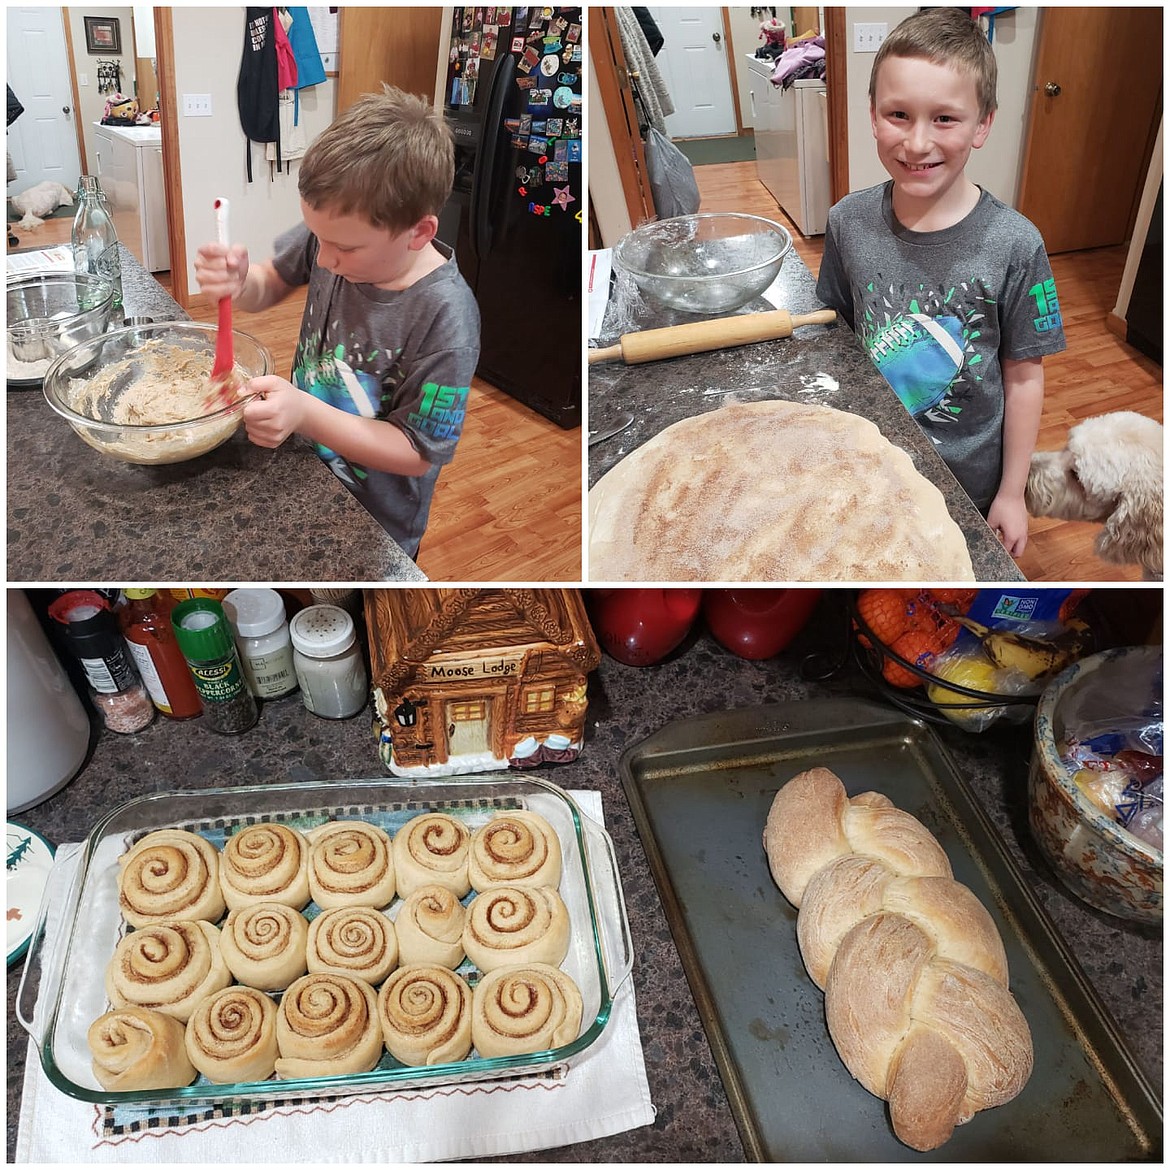 Jase Chapman, a fourth grade student in Erin Bristol's class, baking at home.